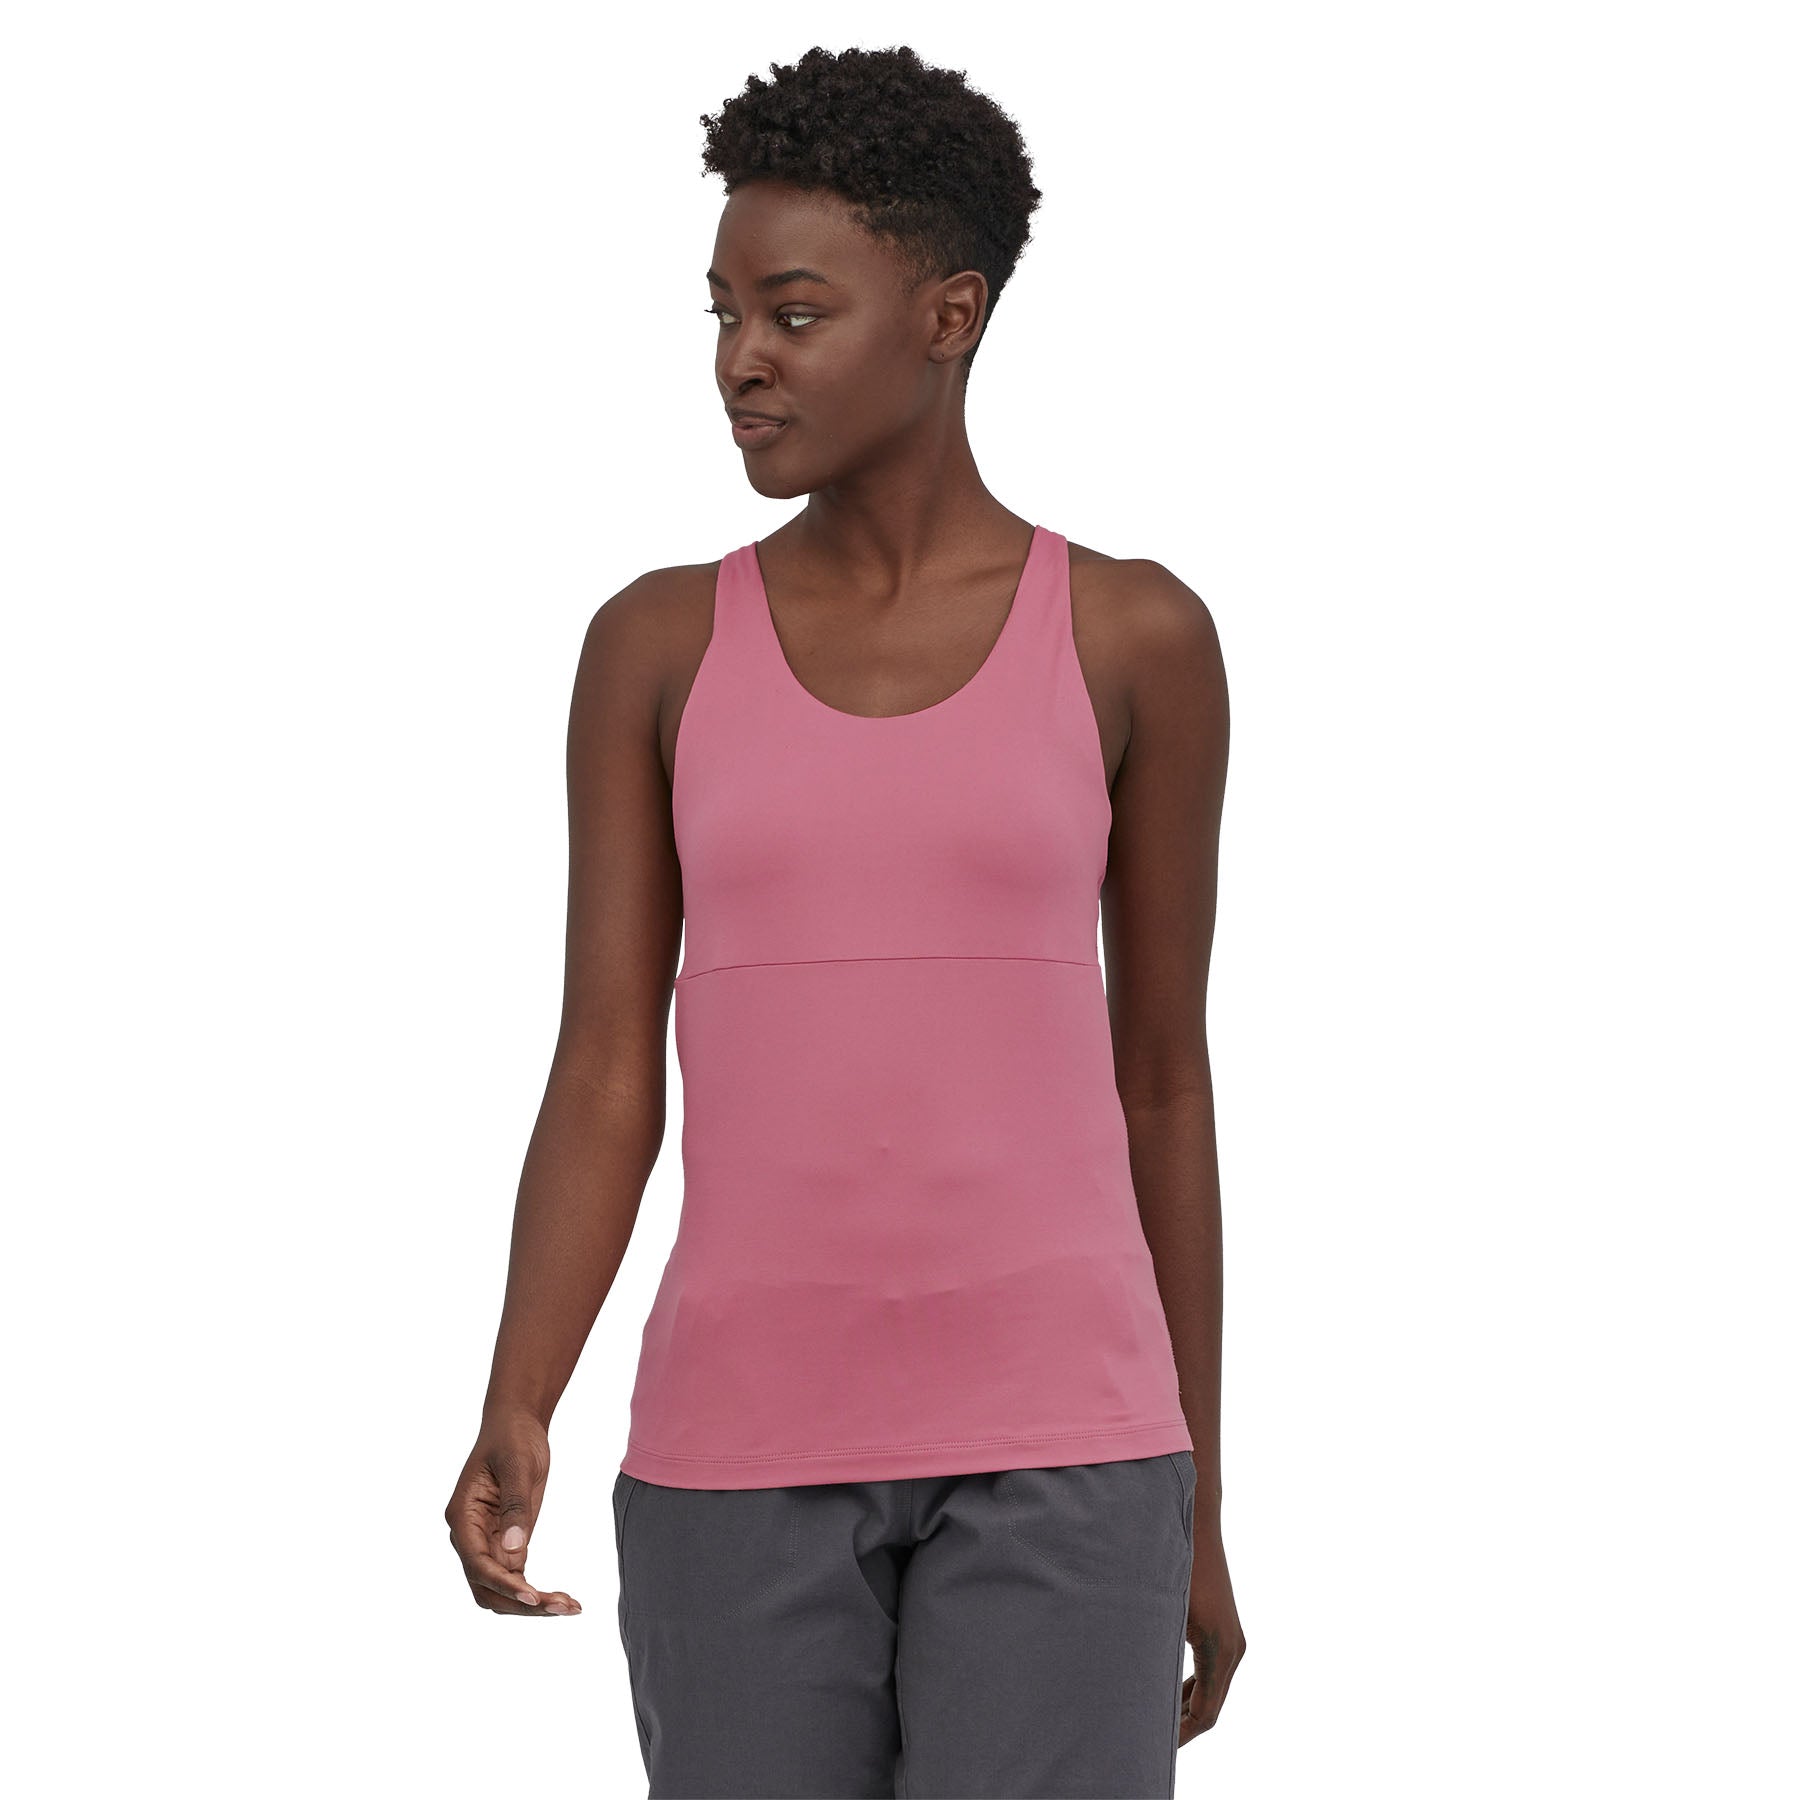 V FOR CITY Women's Flowy Tank Top with Built-in Bra UK